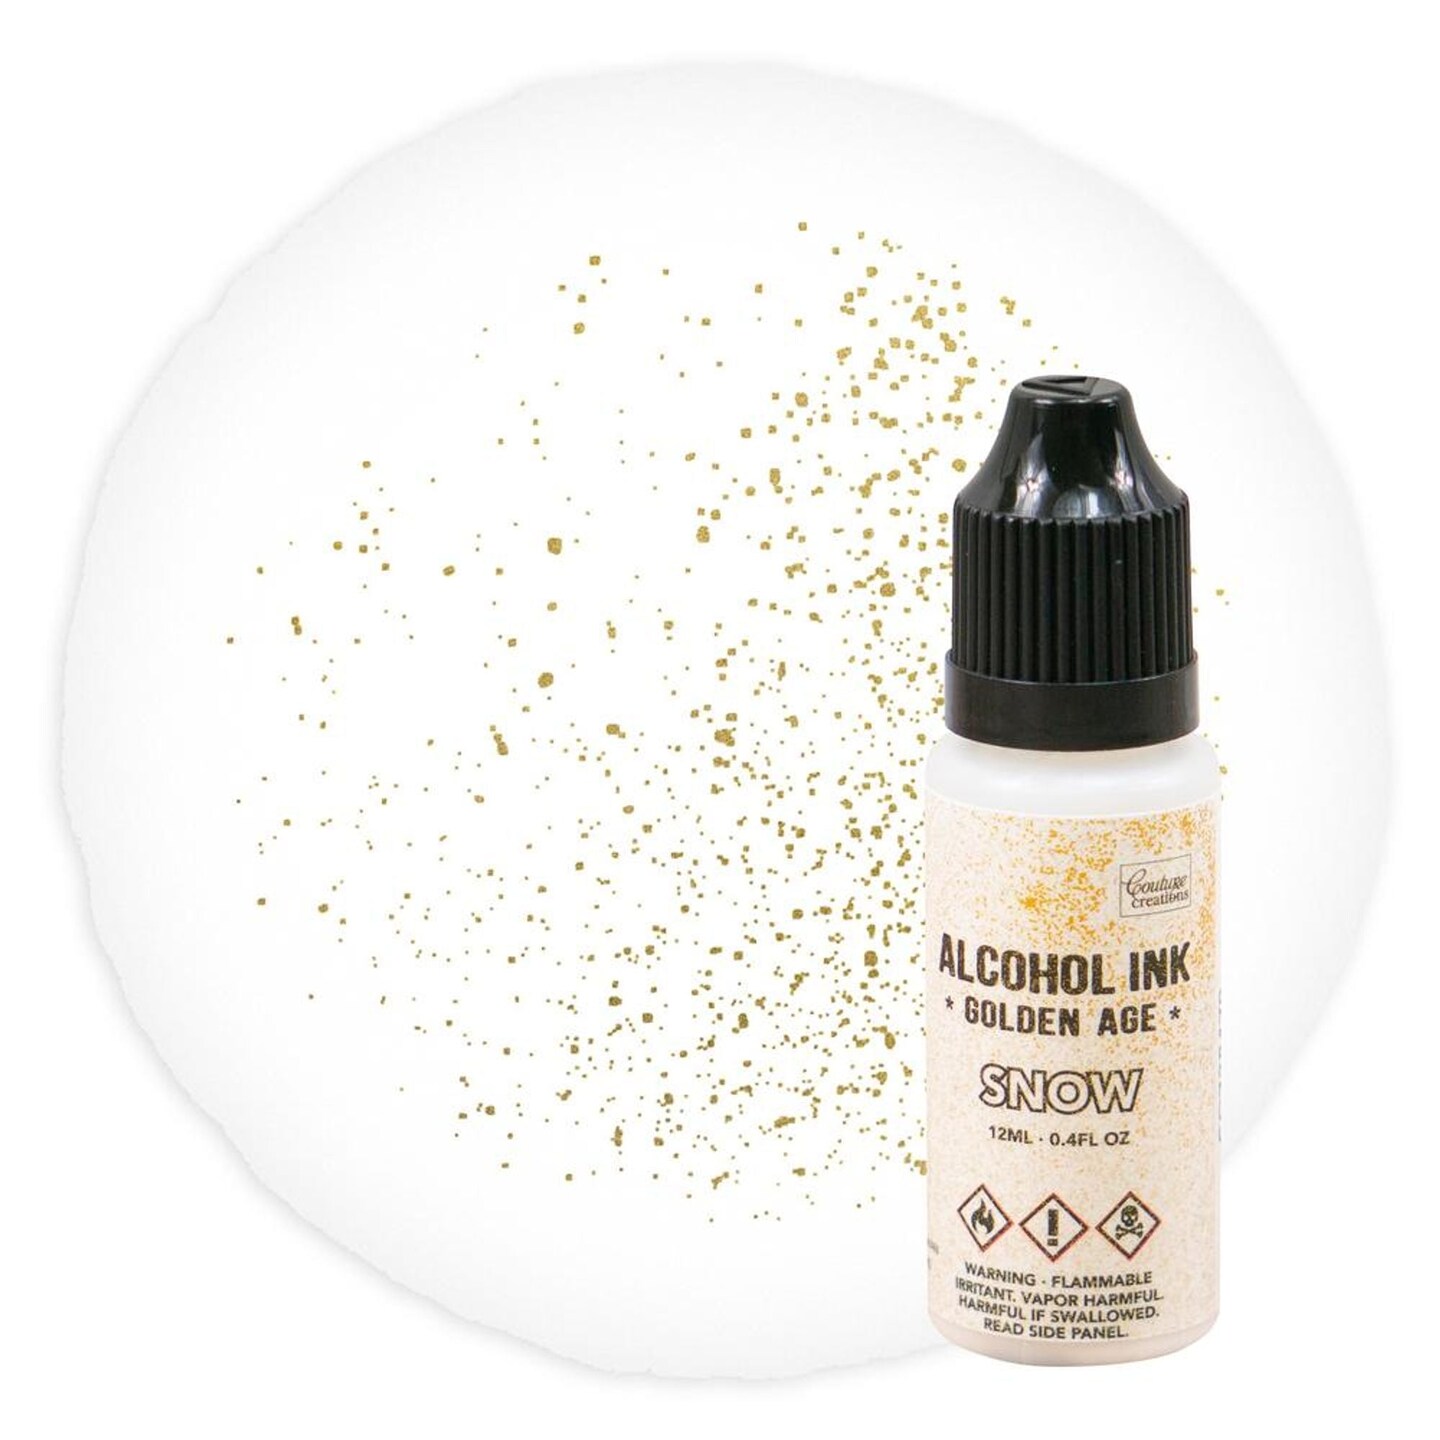 Couture Creations Alcohol Ink Golden Age 12mL | 0.4fl oz - Fuchsia